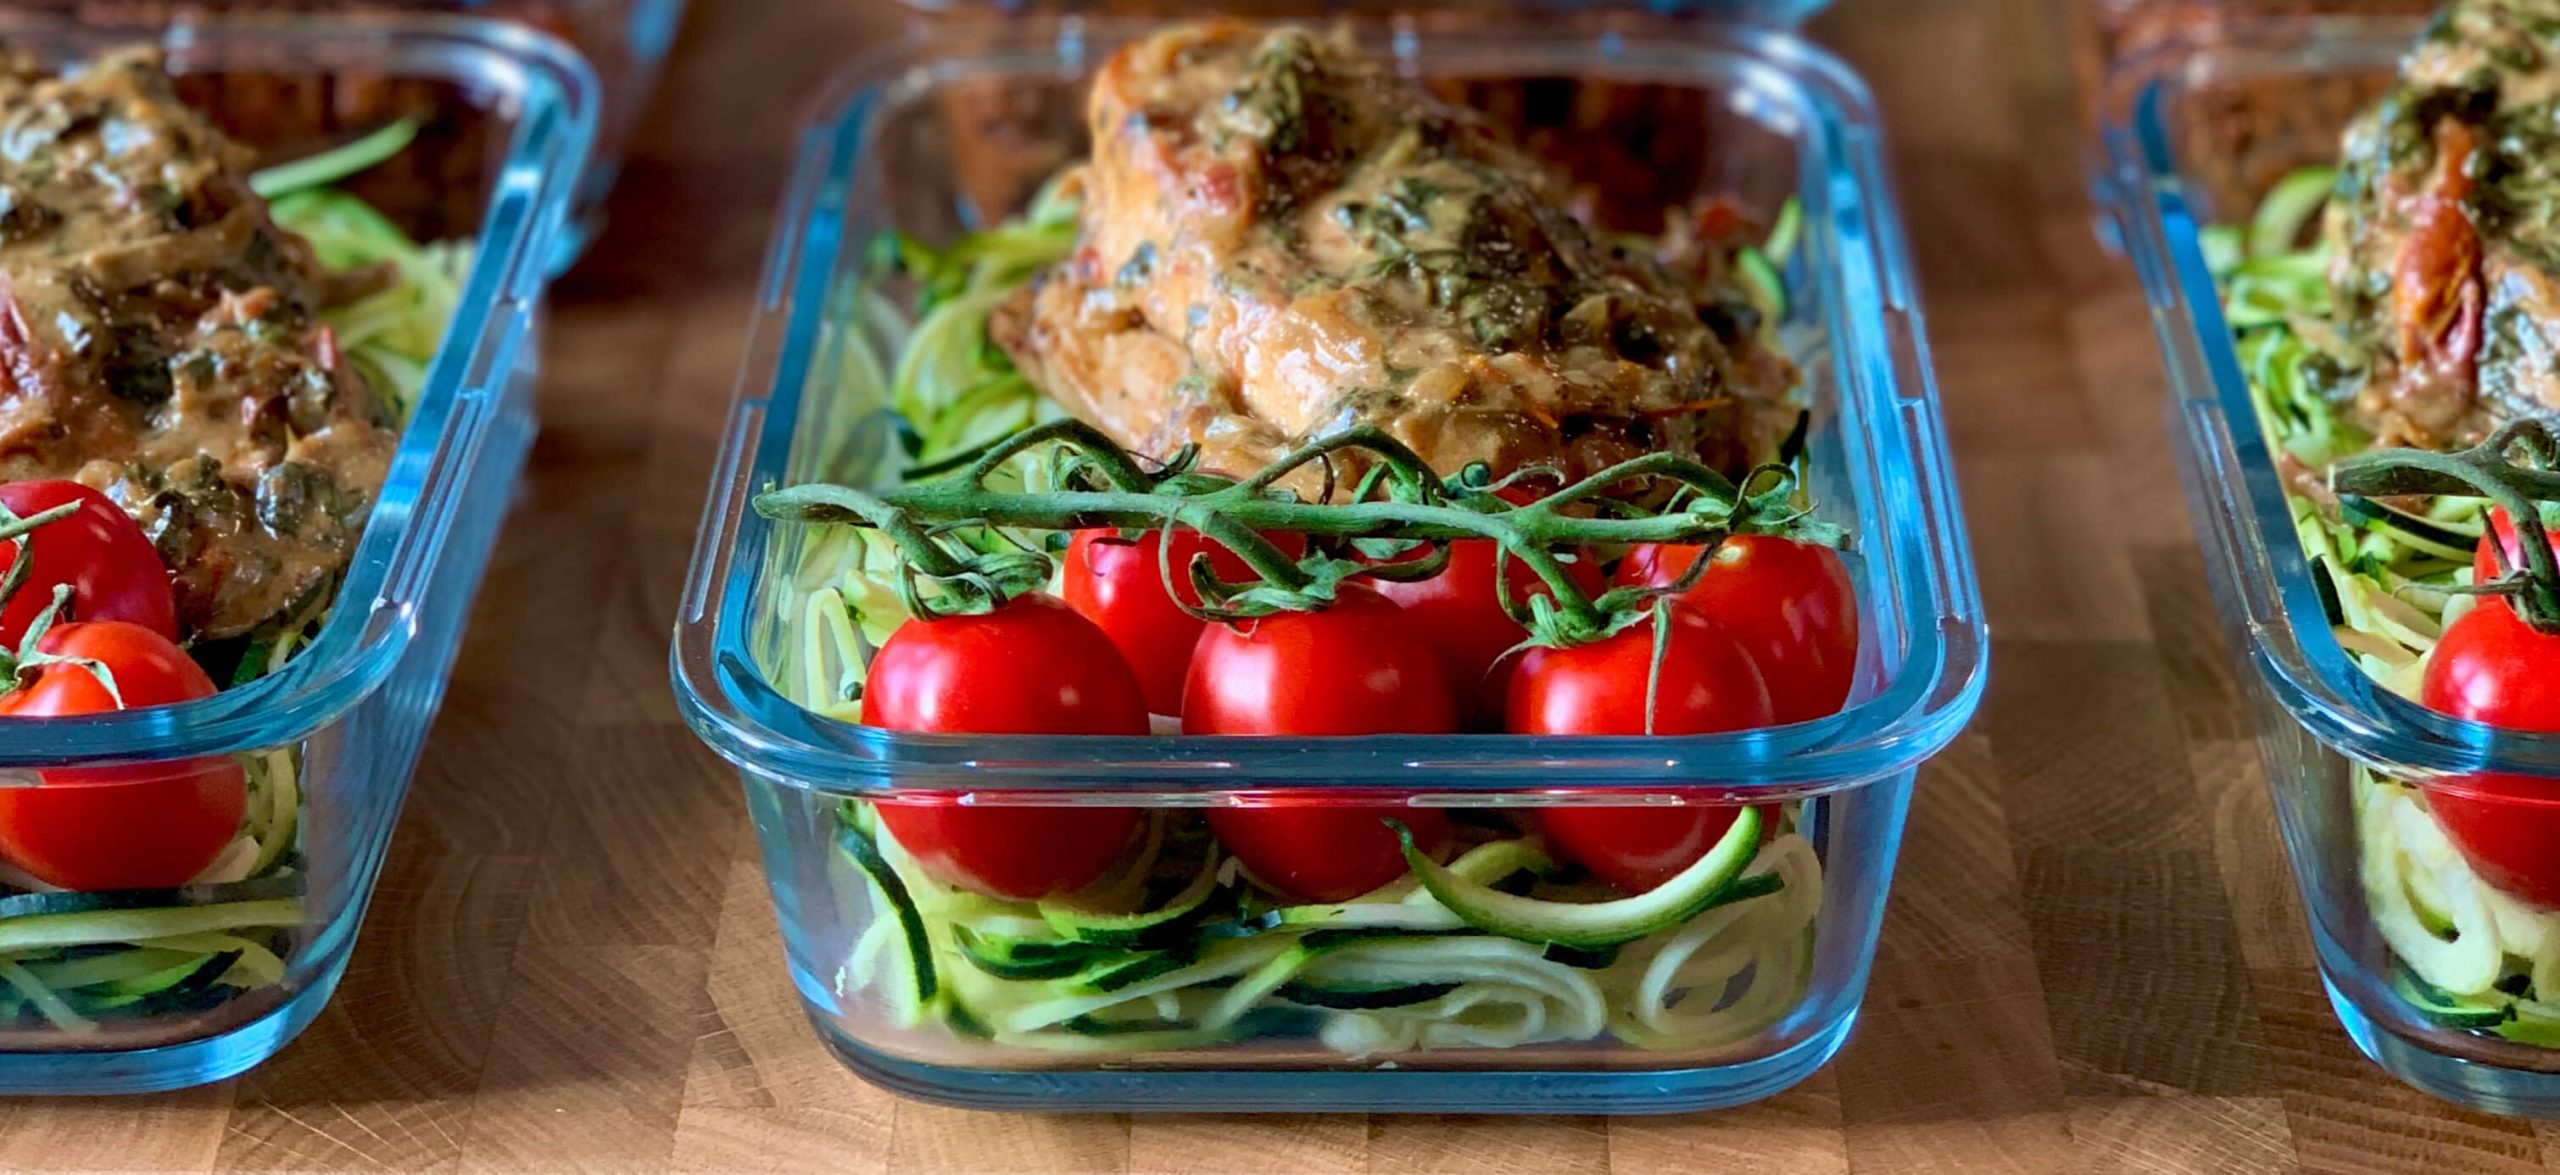 The benefits of meal prepping